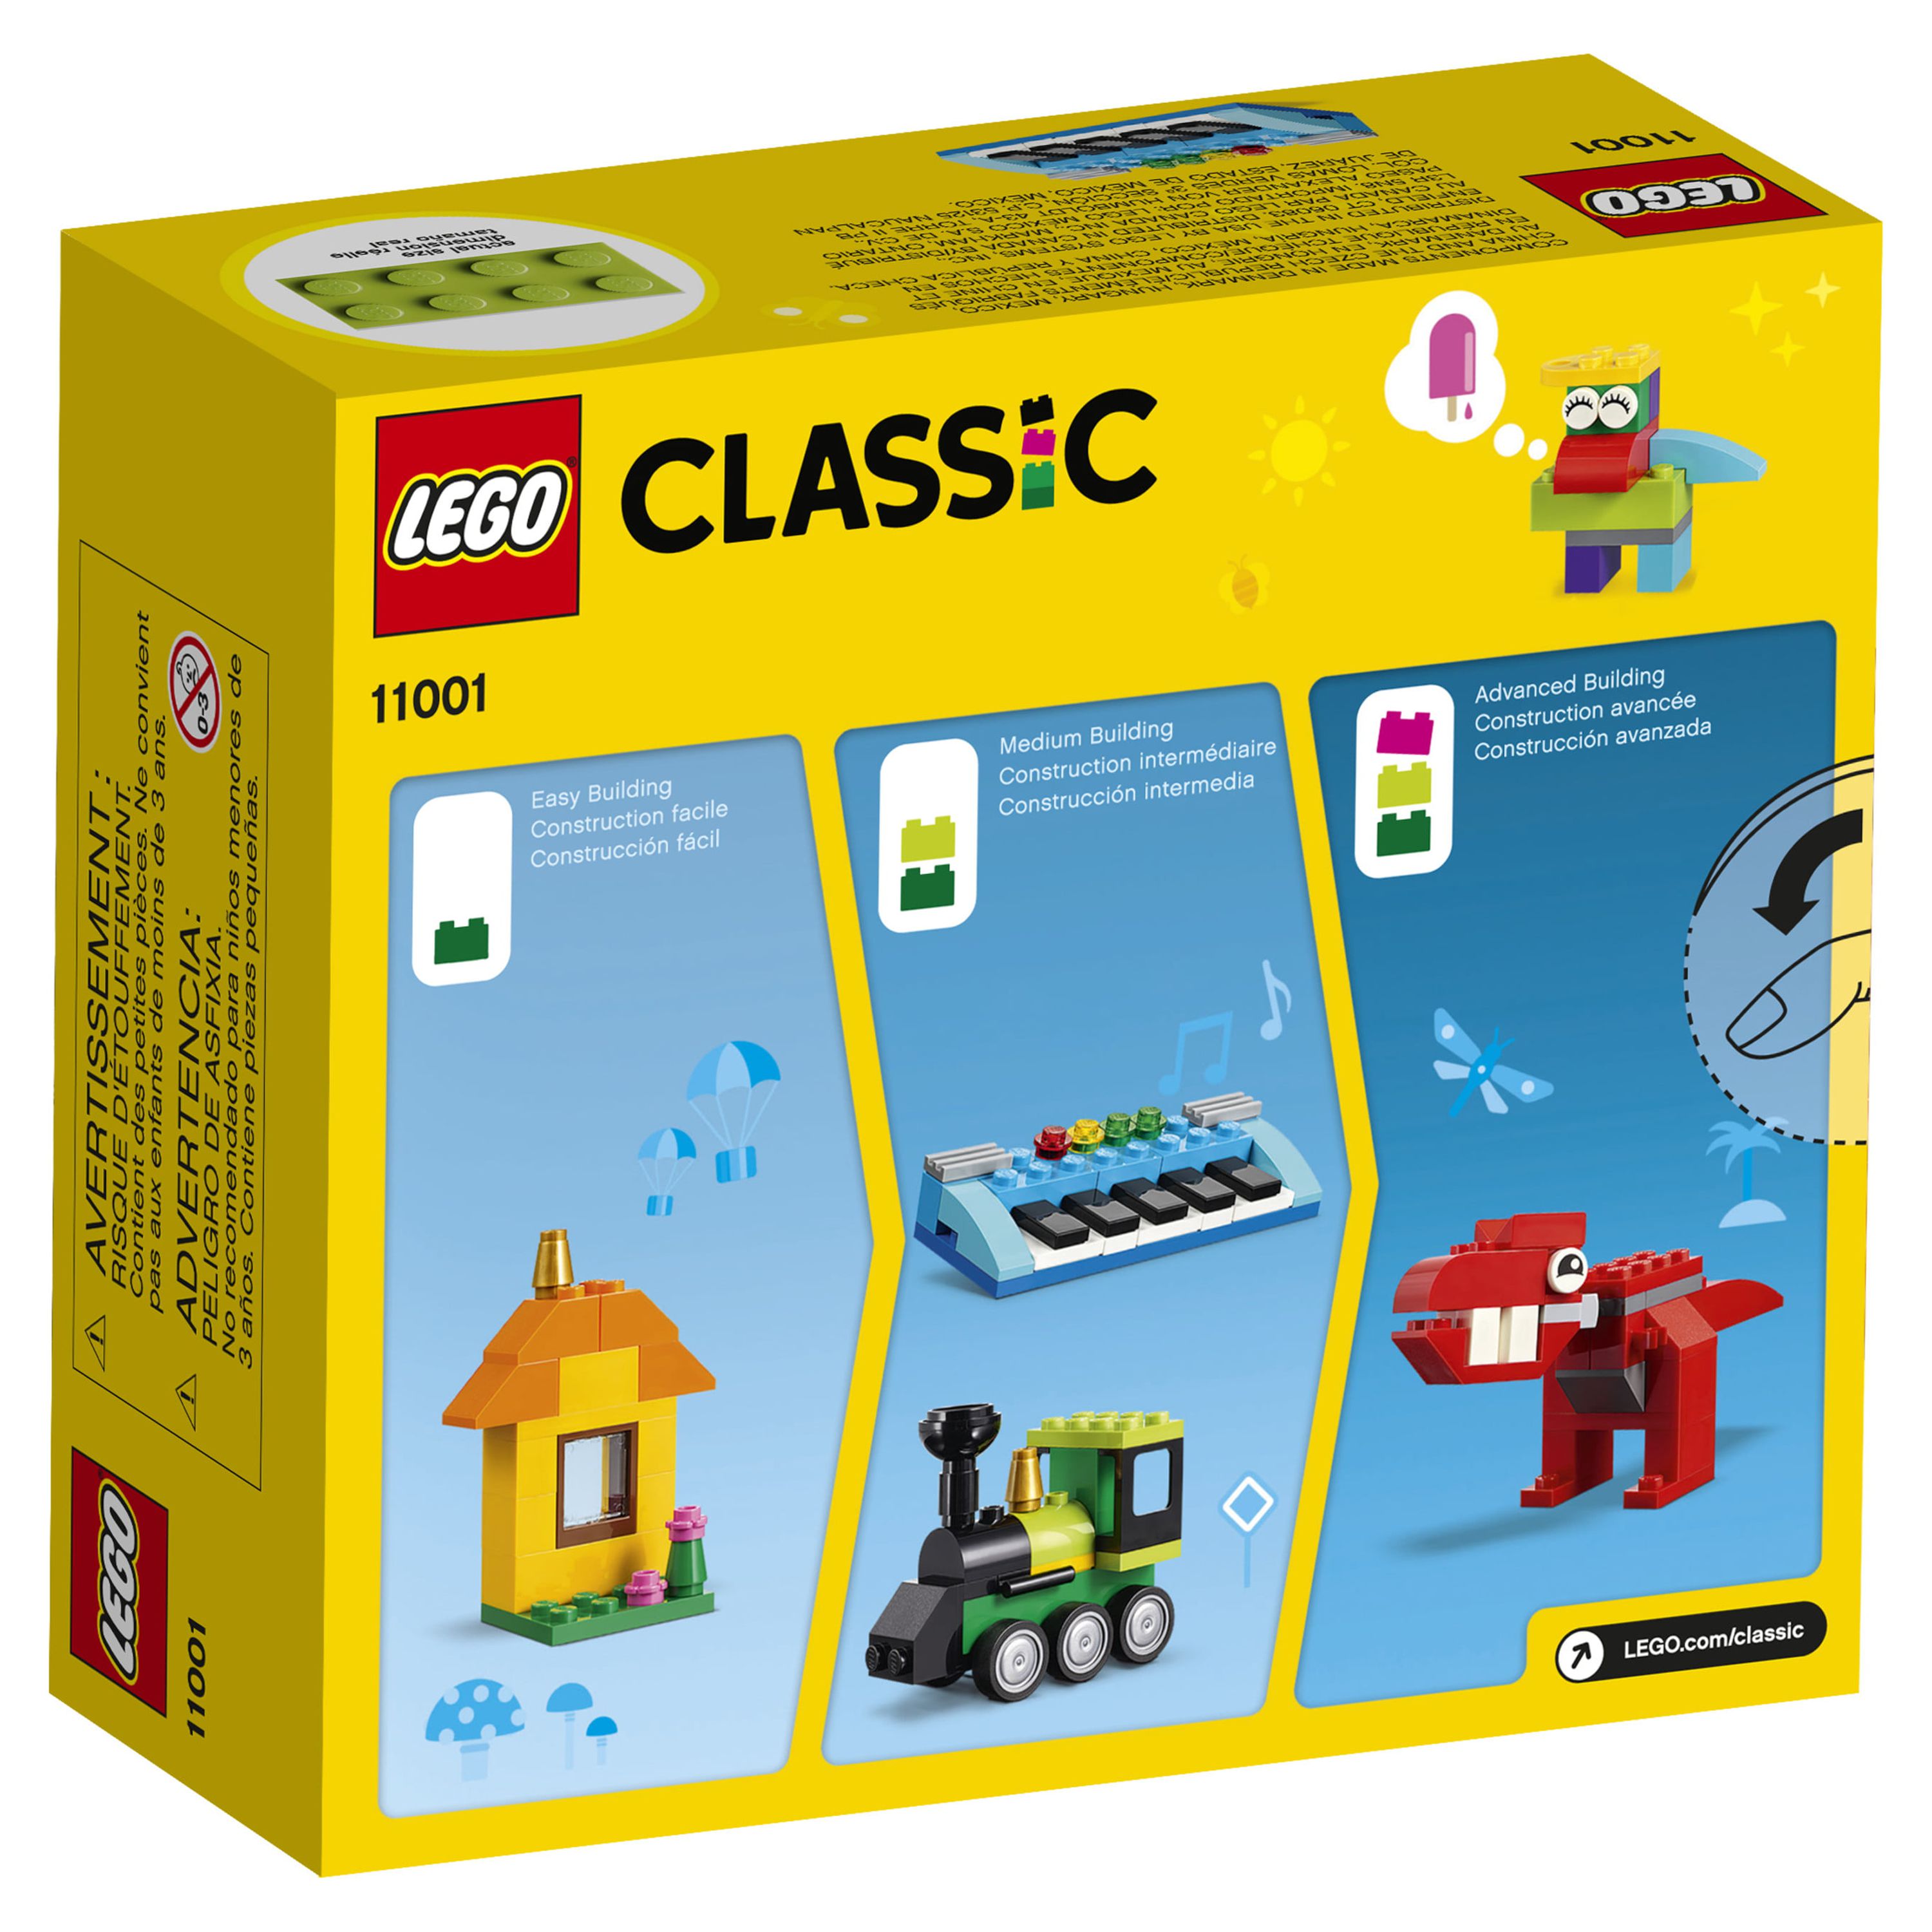 LEGO Classic Bricks and Ideas 11001 (123 Pieces) - image 6 of 6